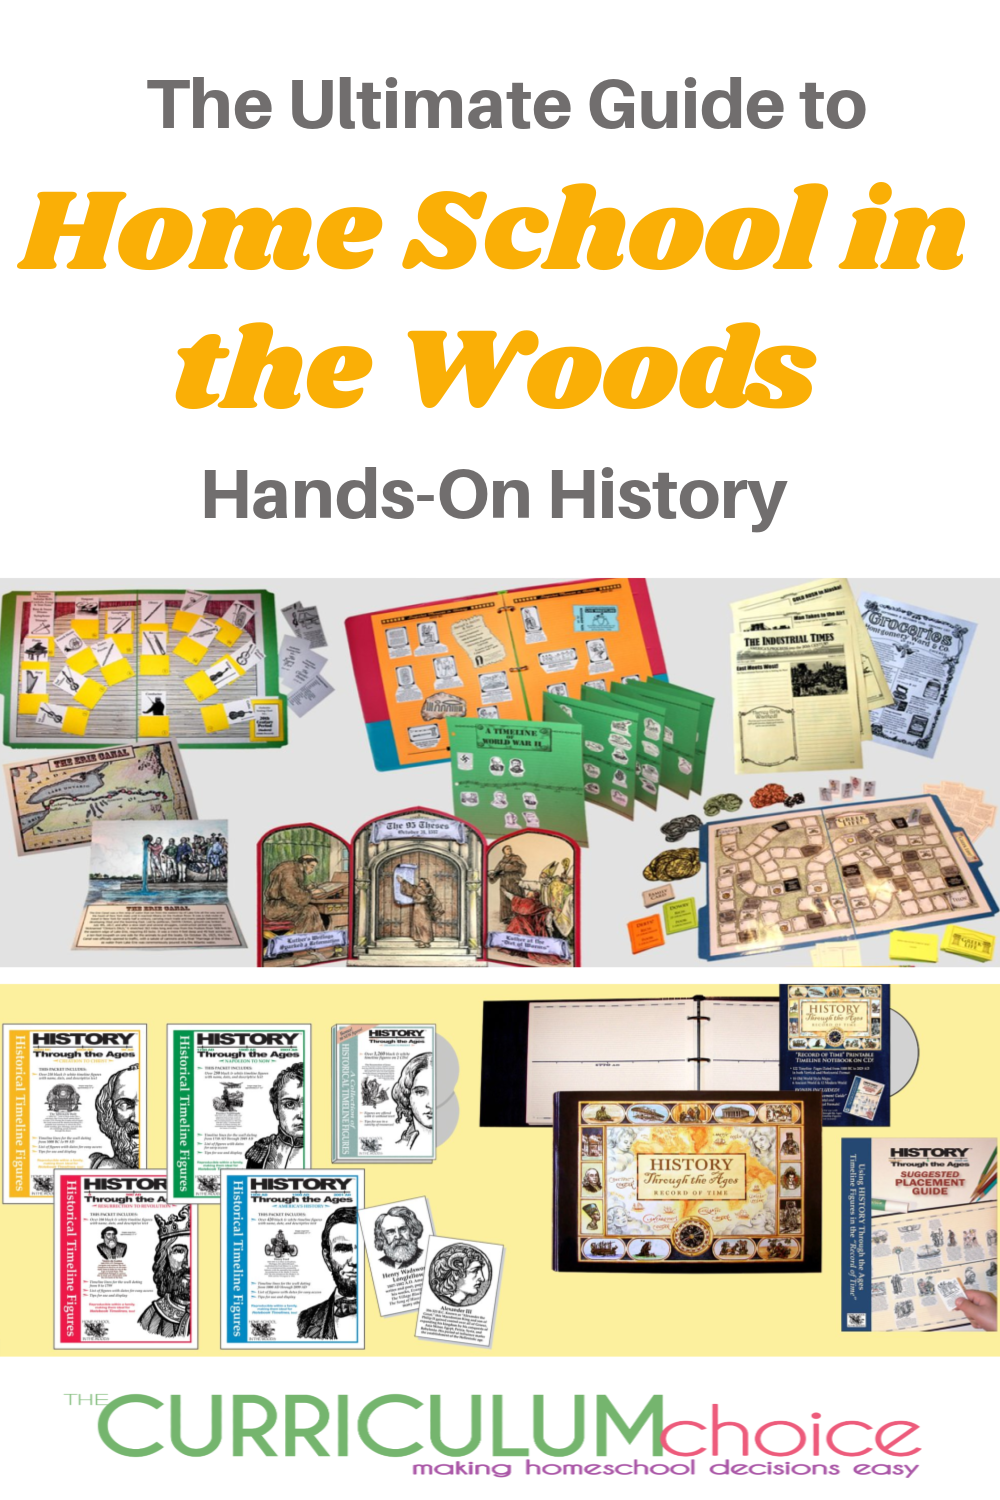 Home School in the Woods Hands-On History Materials include timeline resources, lap books, state studies, mini unit studies and more! Take a look at each product and read reviews from some of our Curriculum Choice authors!